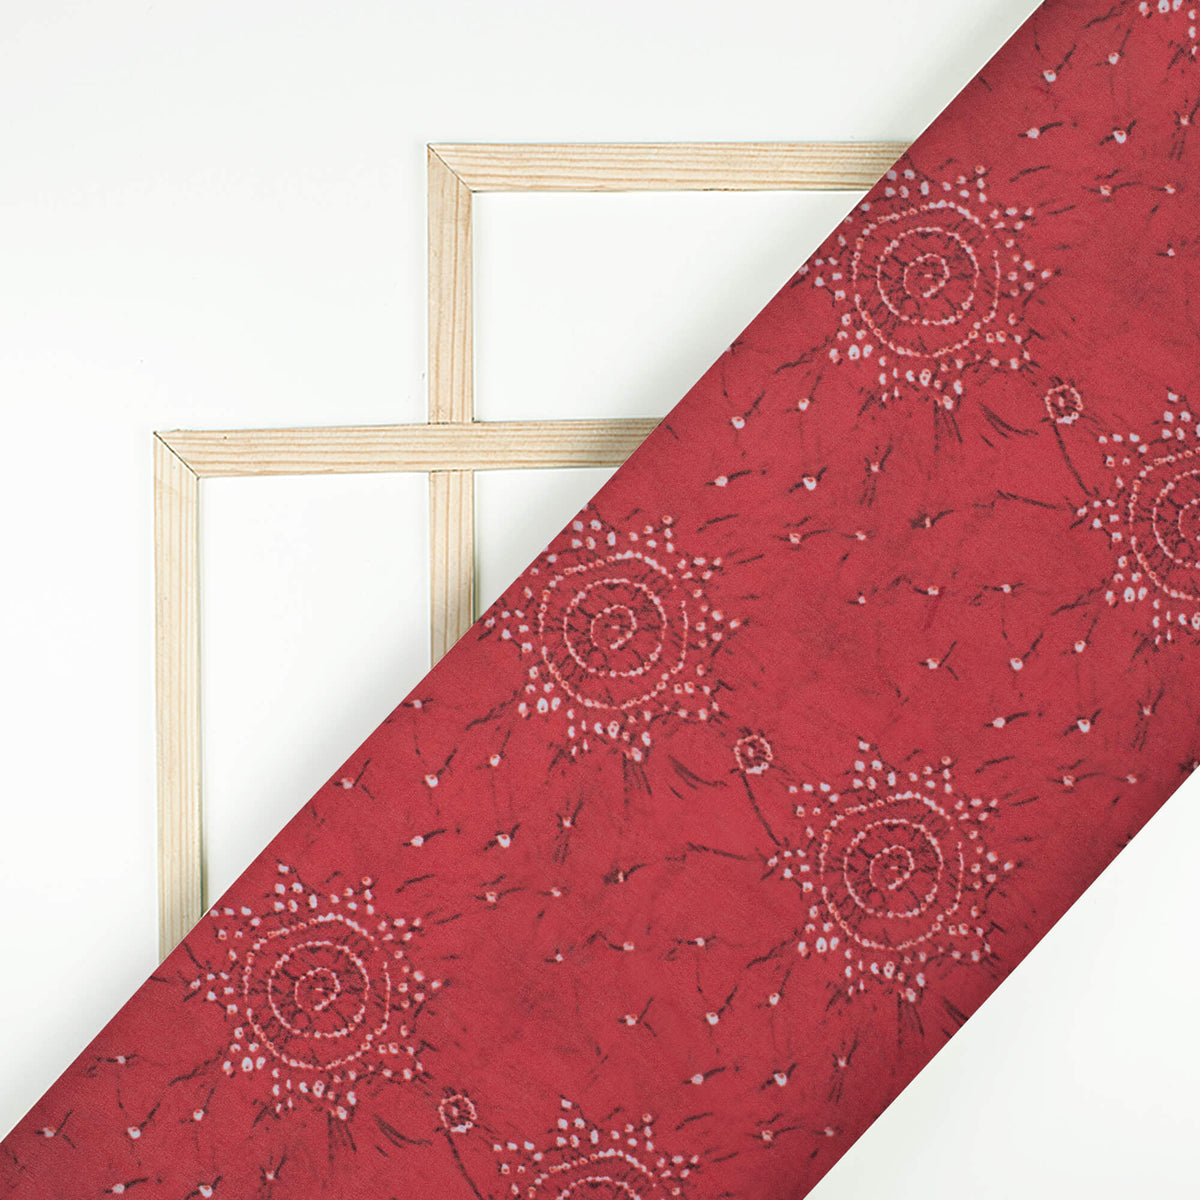 Mahogany Red And White Traditional Pattern Digital Print Georgette Fabric